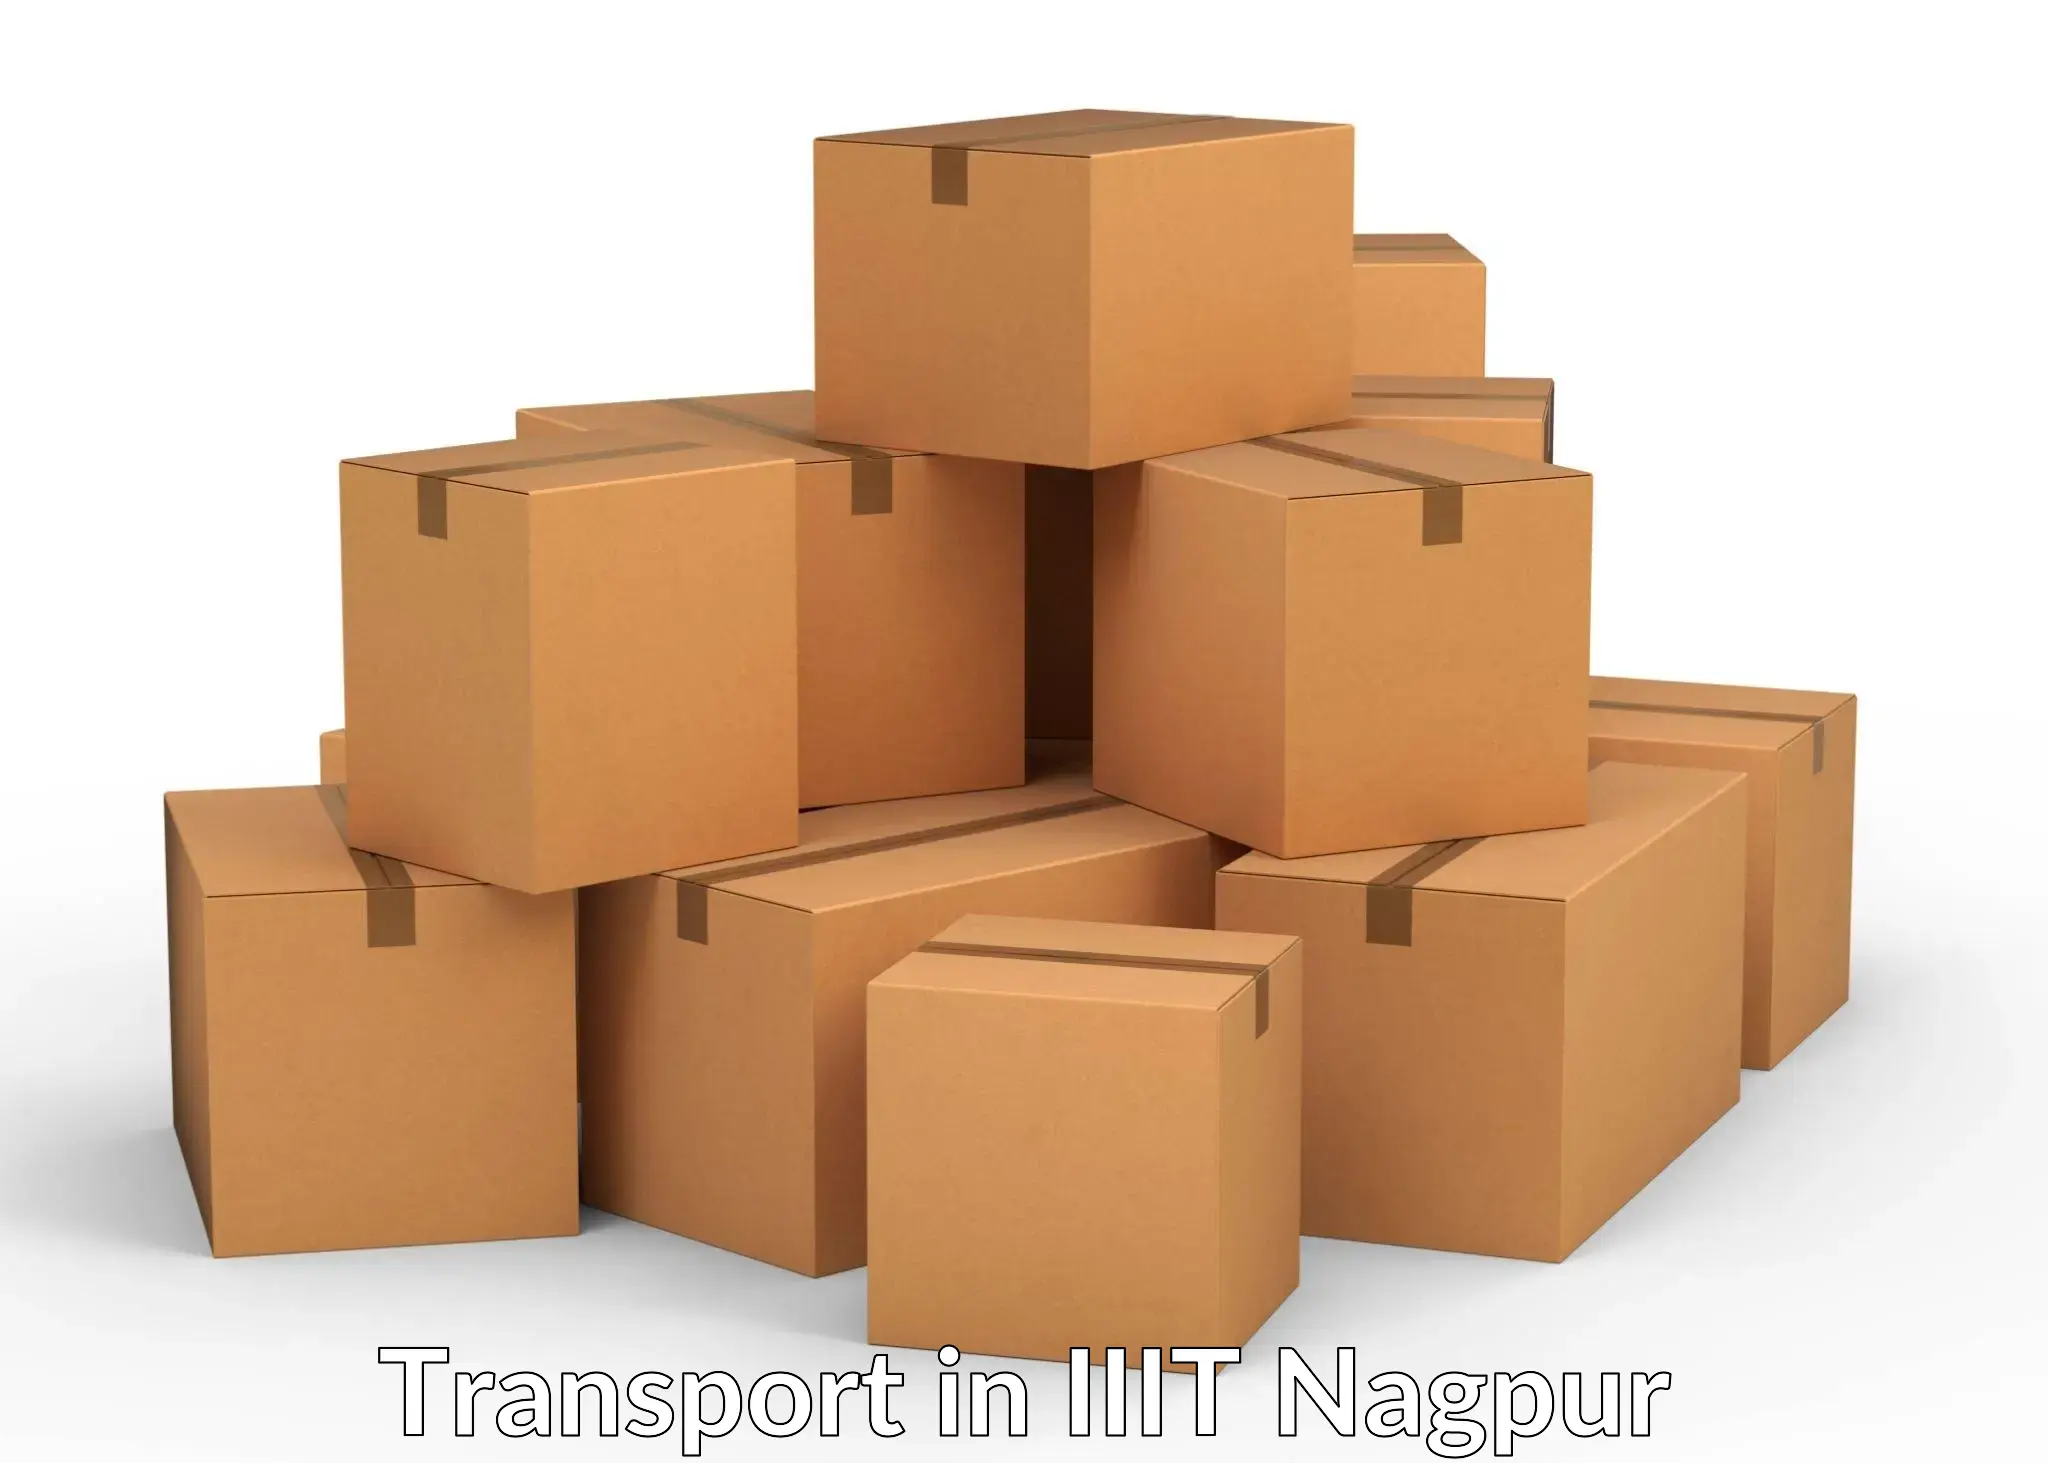 Vehicle transport services in IIIT Nagpur